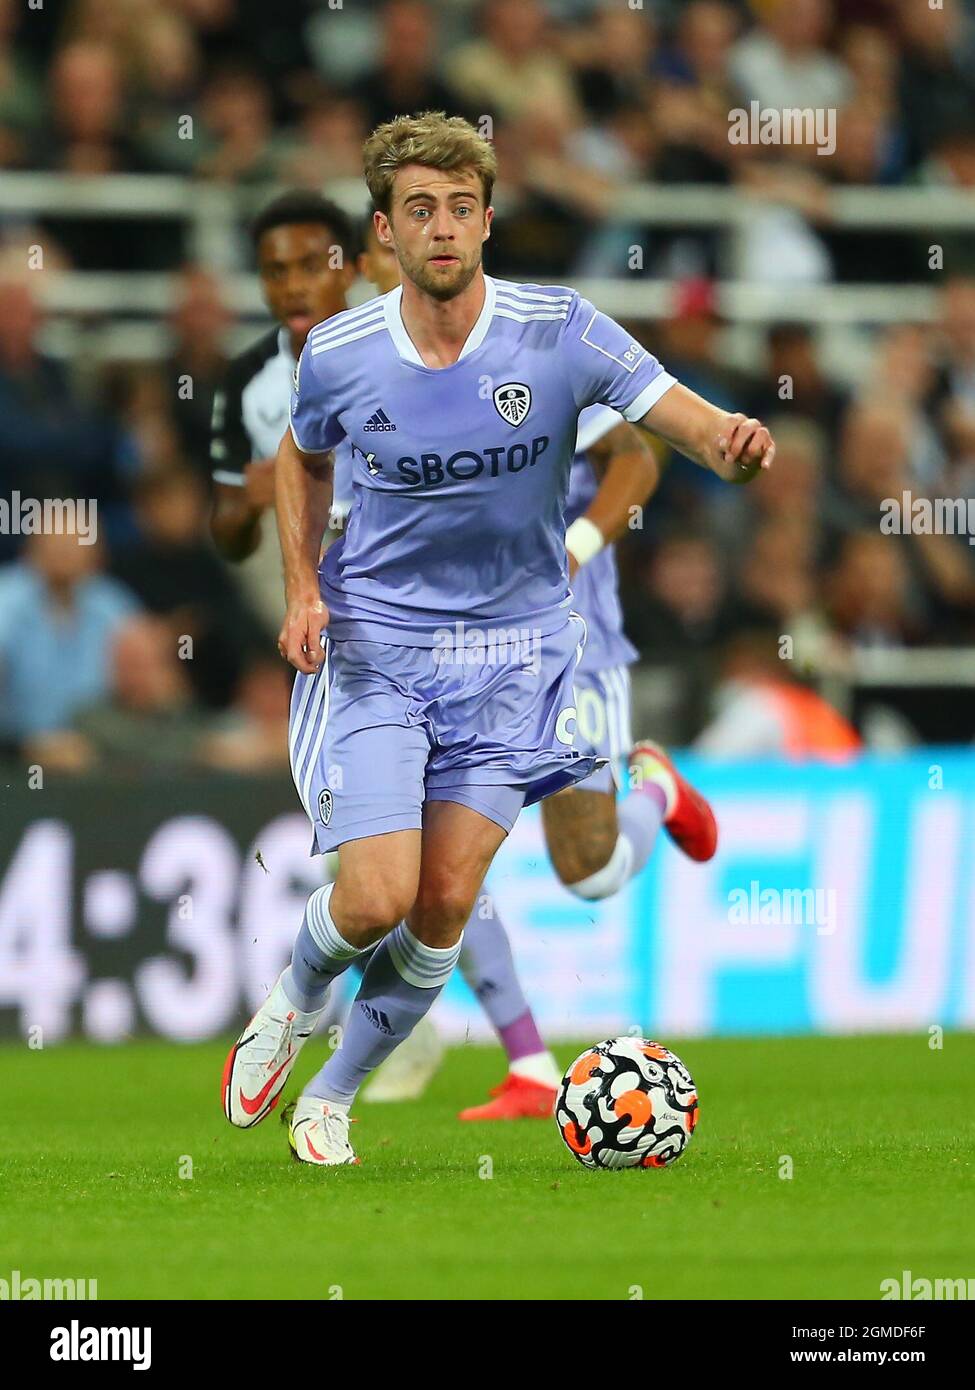 NEWCASTLE UPON TYNE, ENGLAND - SEPTEMBER 17: Patrick Bamford of Leeds United brings the ball forward during the Premier League match between Newcastle United and Leeds United at St. James Park on September 17, 2021 in Newcastle upon Tyne, England. (Photo by MB Media) Stock Photo